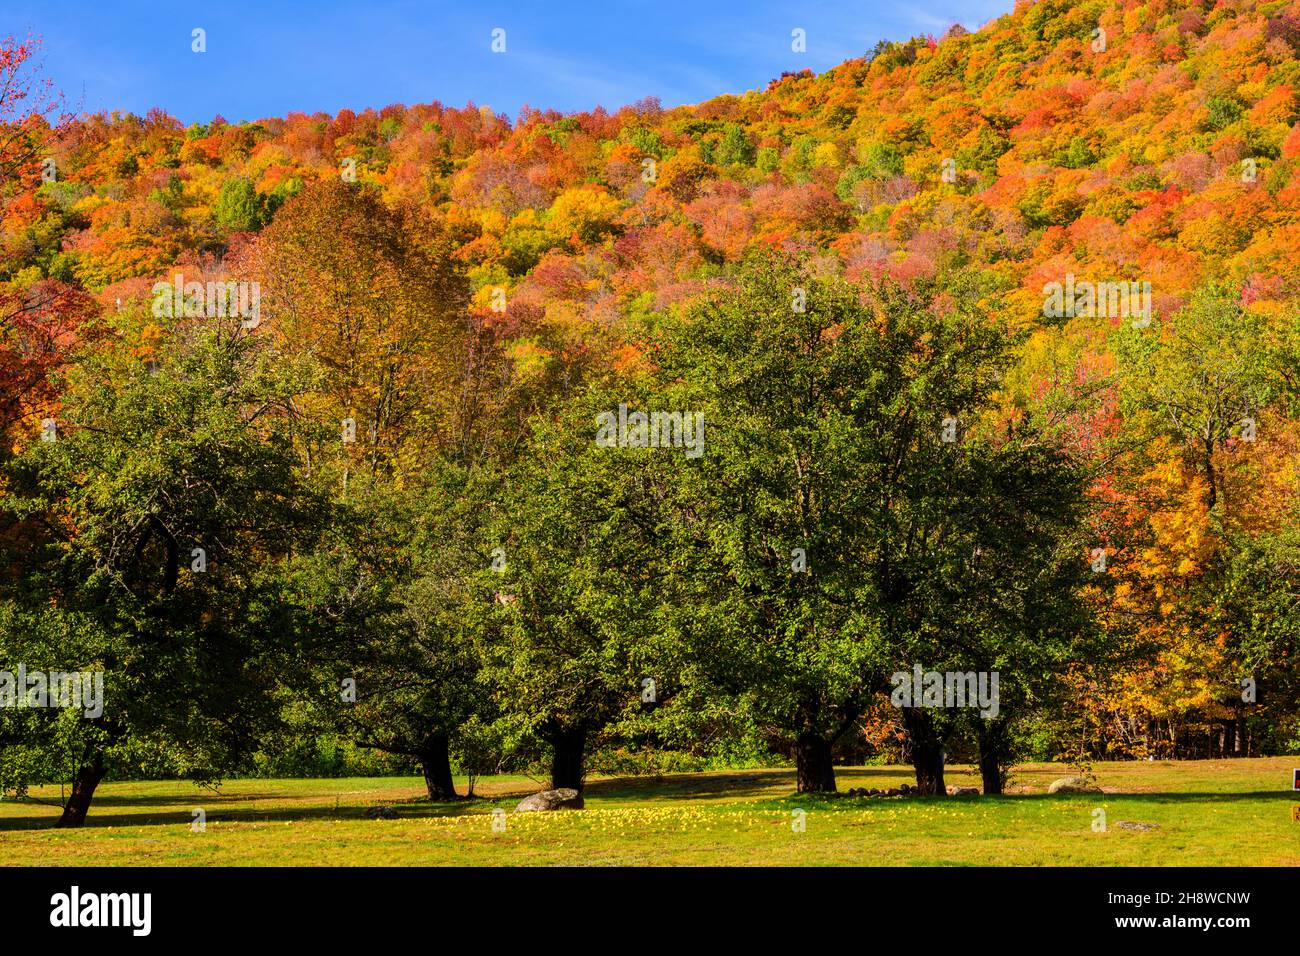 Autumn foliage in the deciduous forest on New England hillsides, The Dana House, Highway 16 , New Hampshire, USA Stock Photo